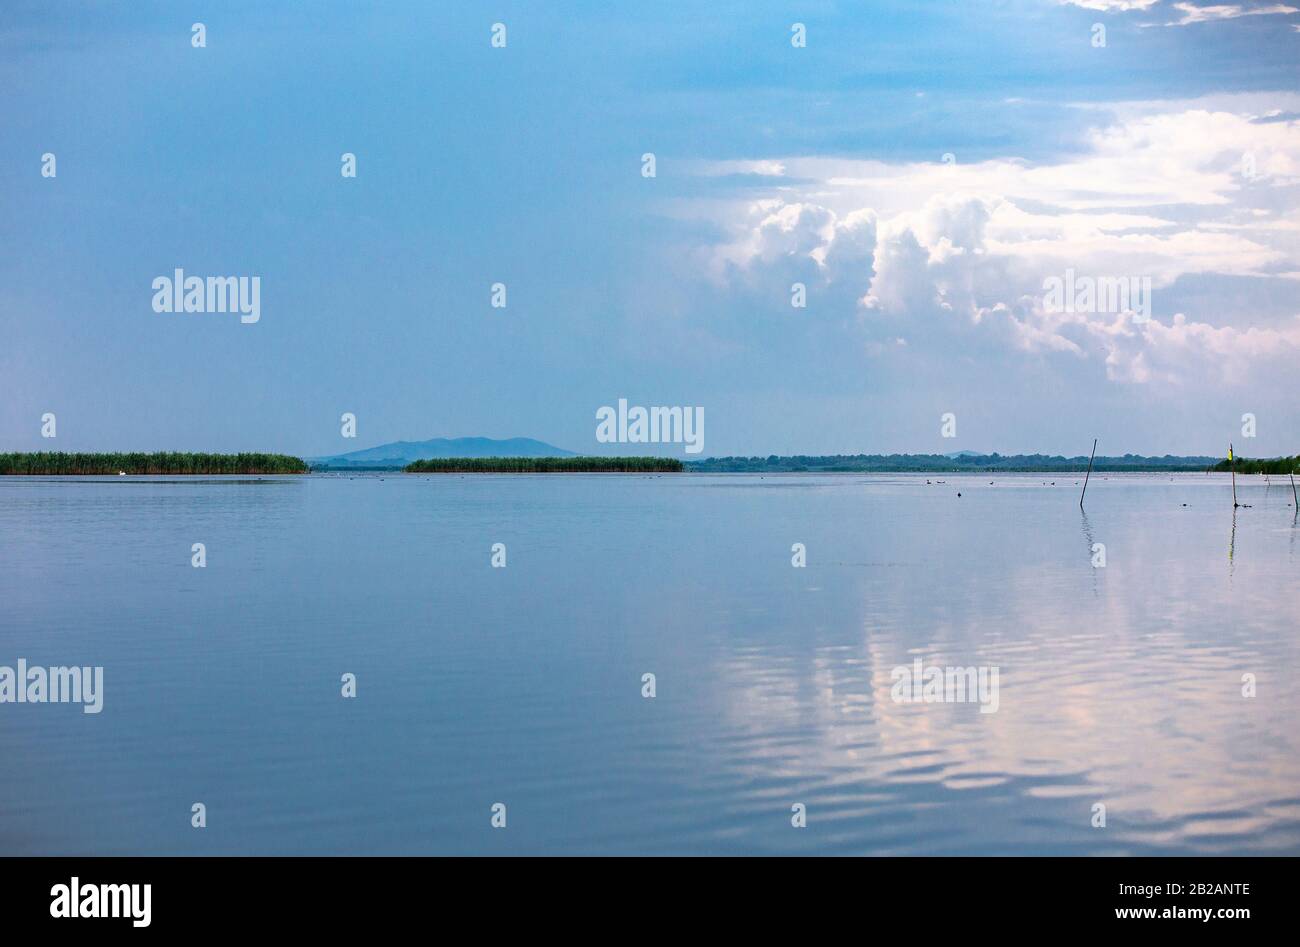 Wild birds paradise - River Danube in Romania - Delta, nature pure in a water world as seen from a boat Stock Photo